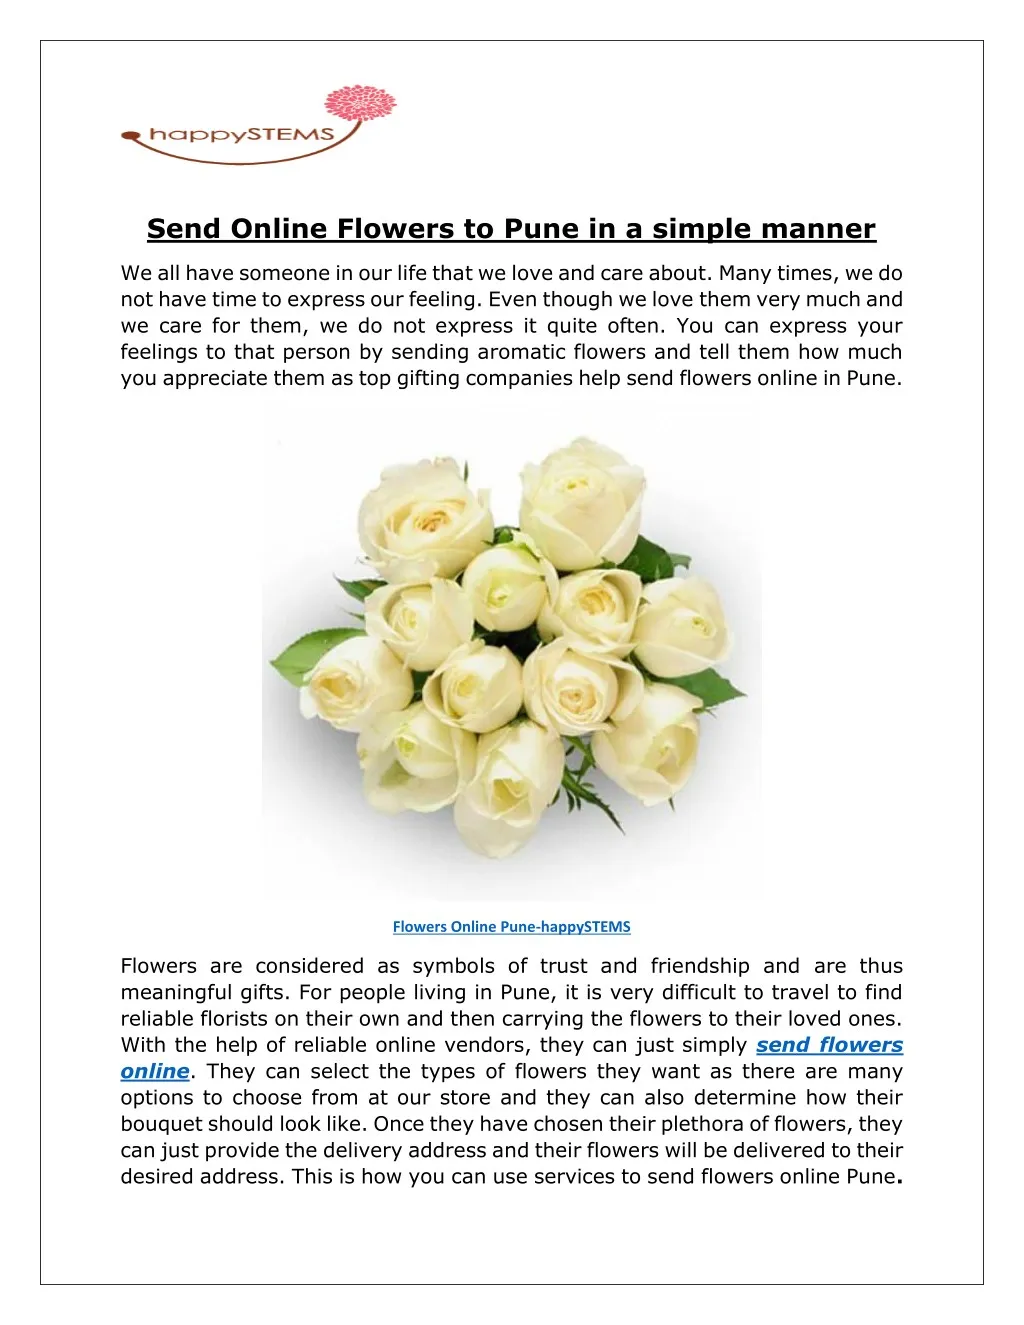 send online flowers to pune in a simple manner